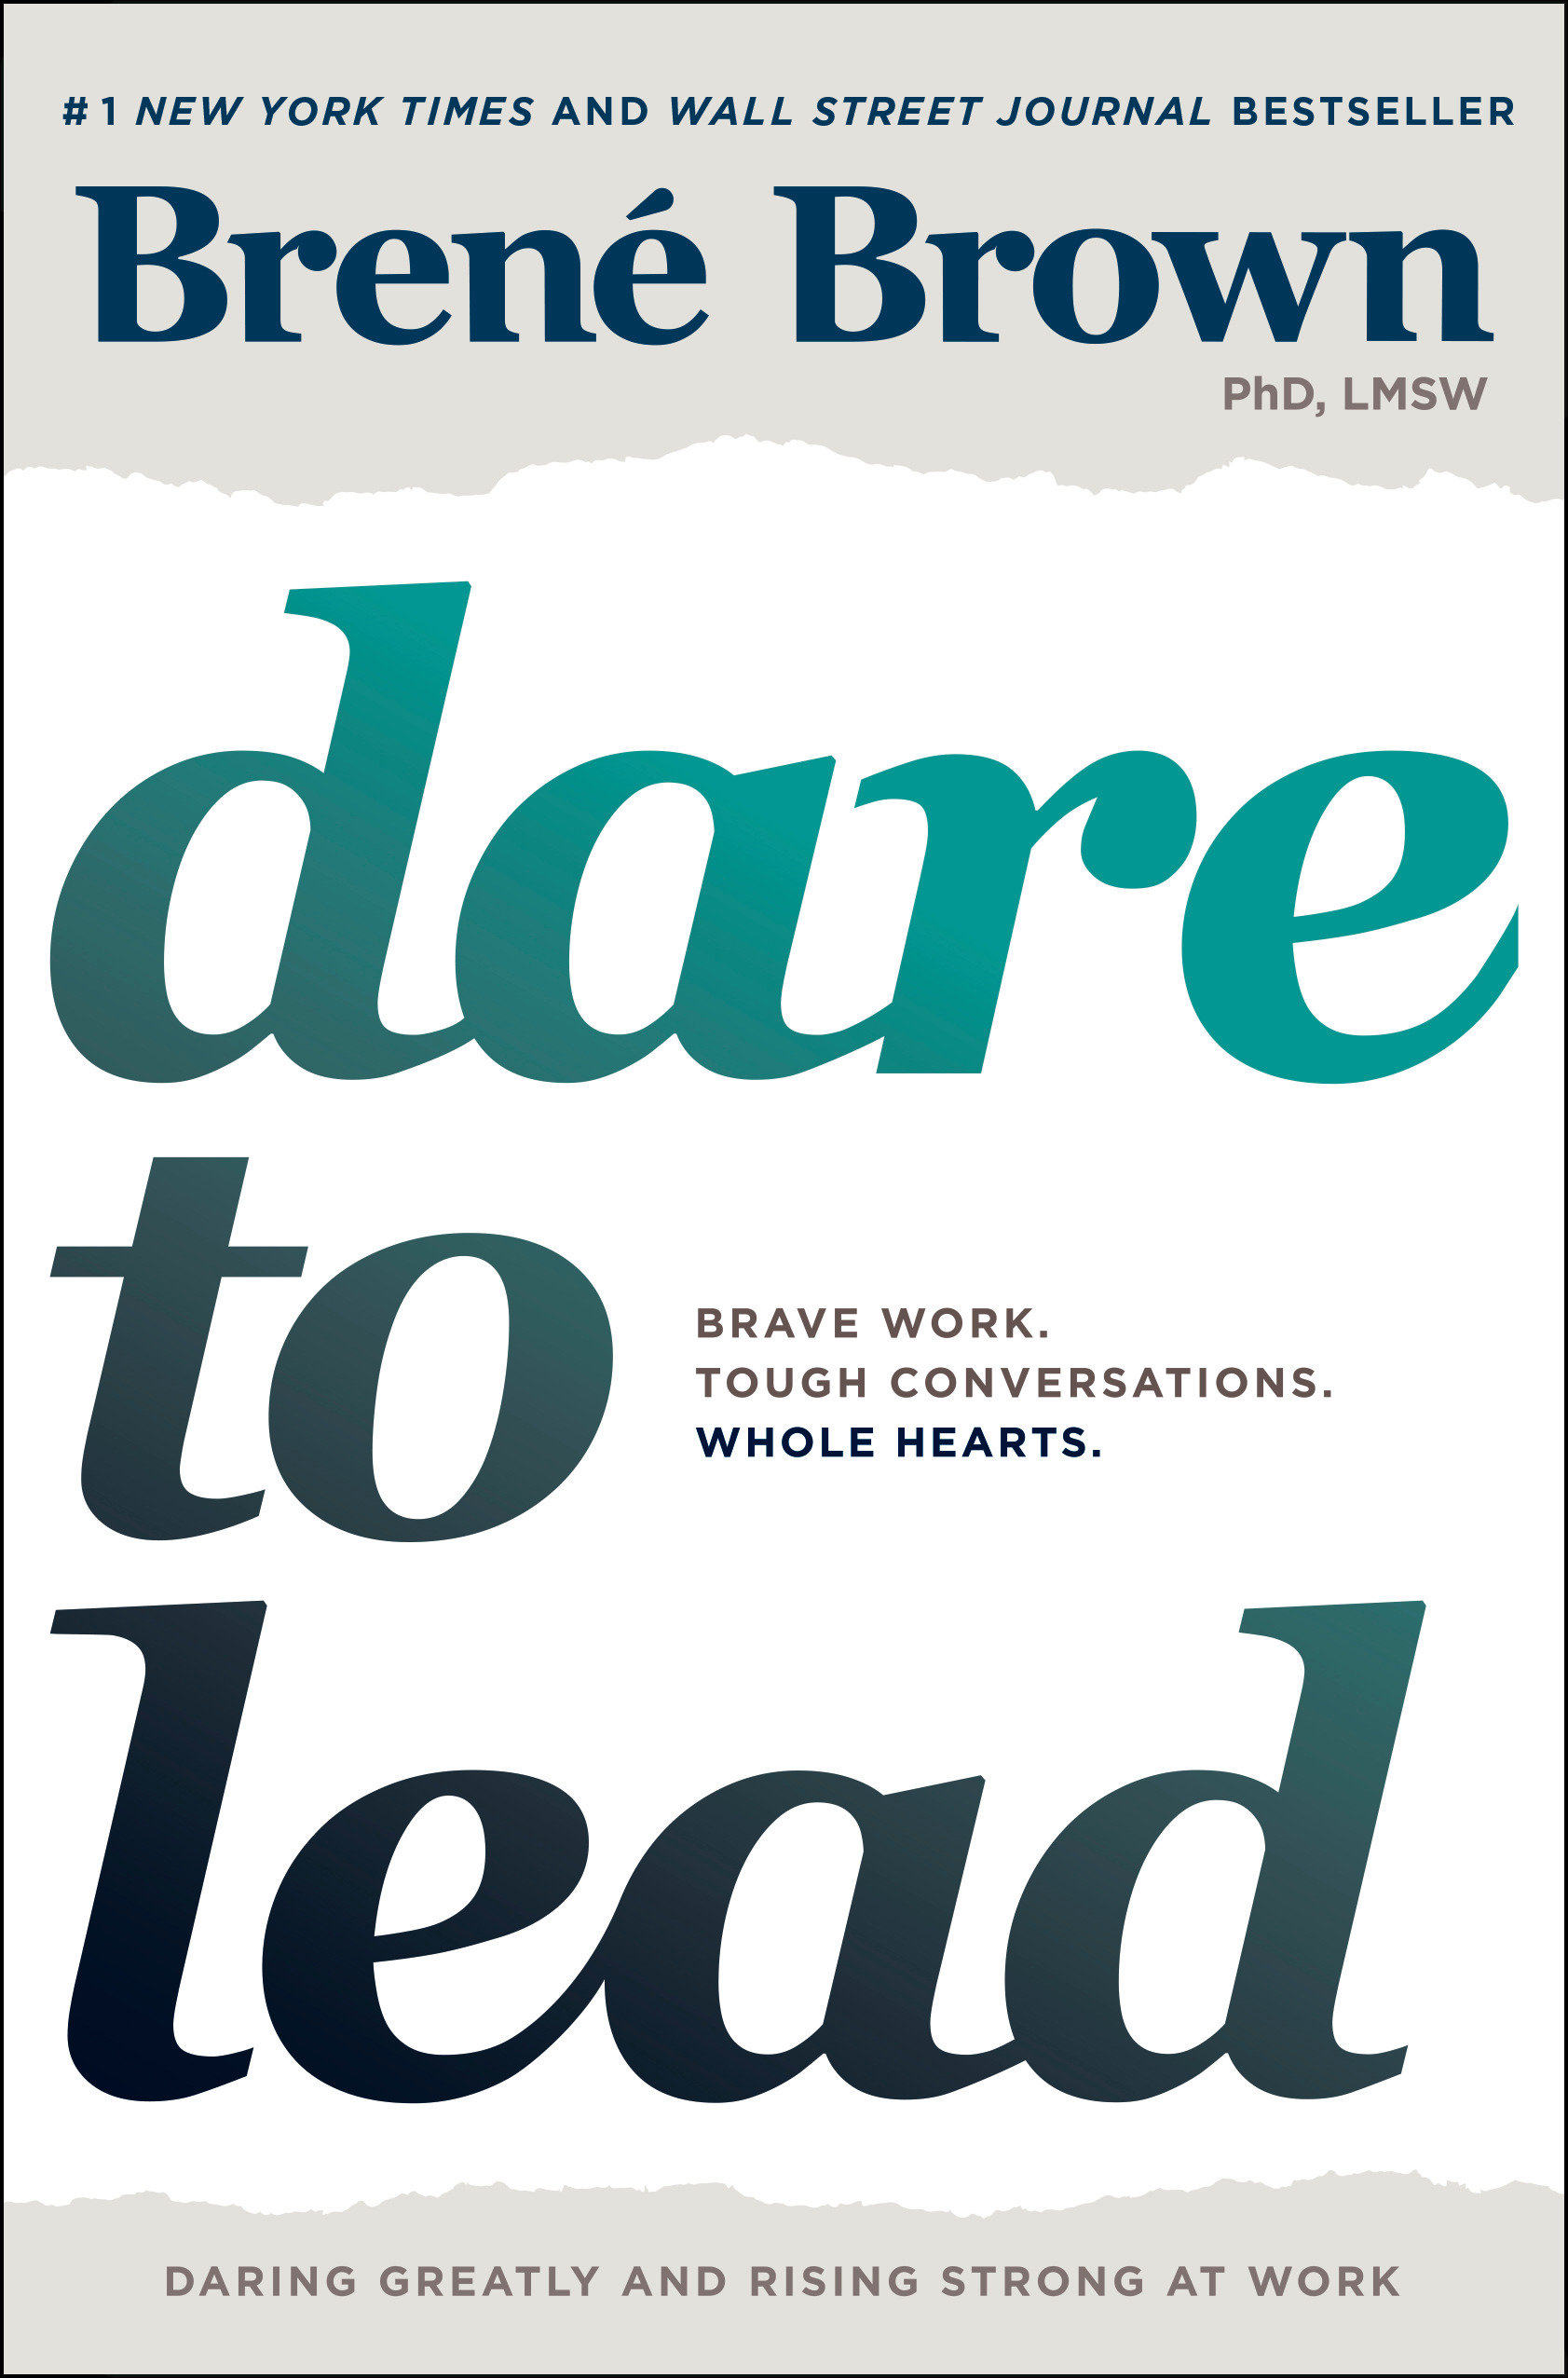 Link to Dare to Lead by Brene Brown in the Catalog